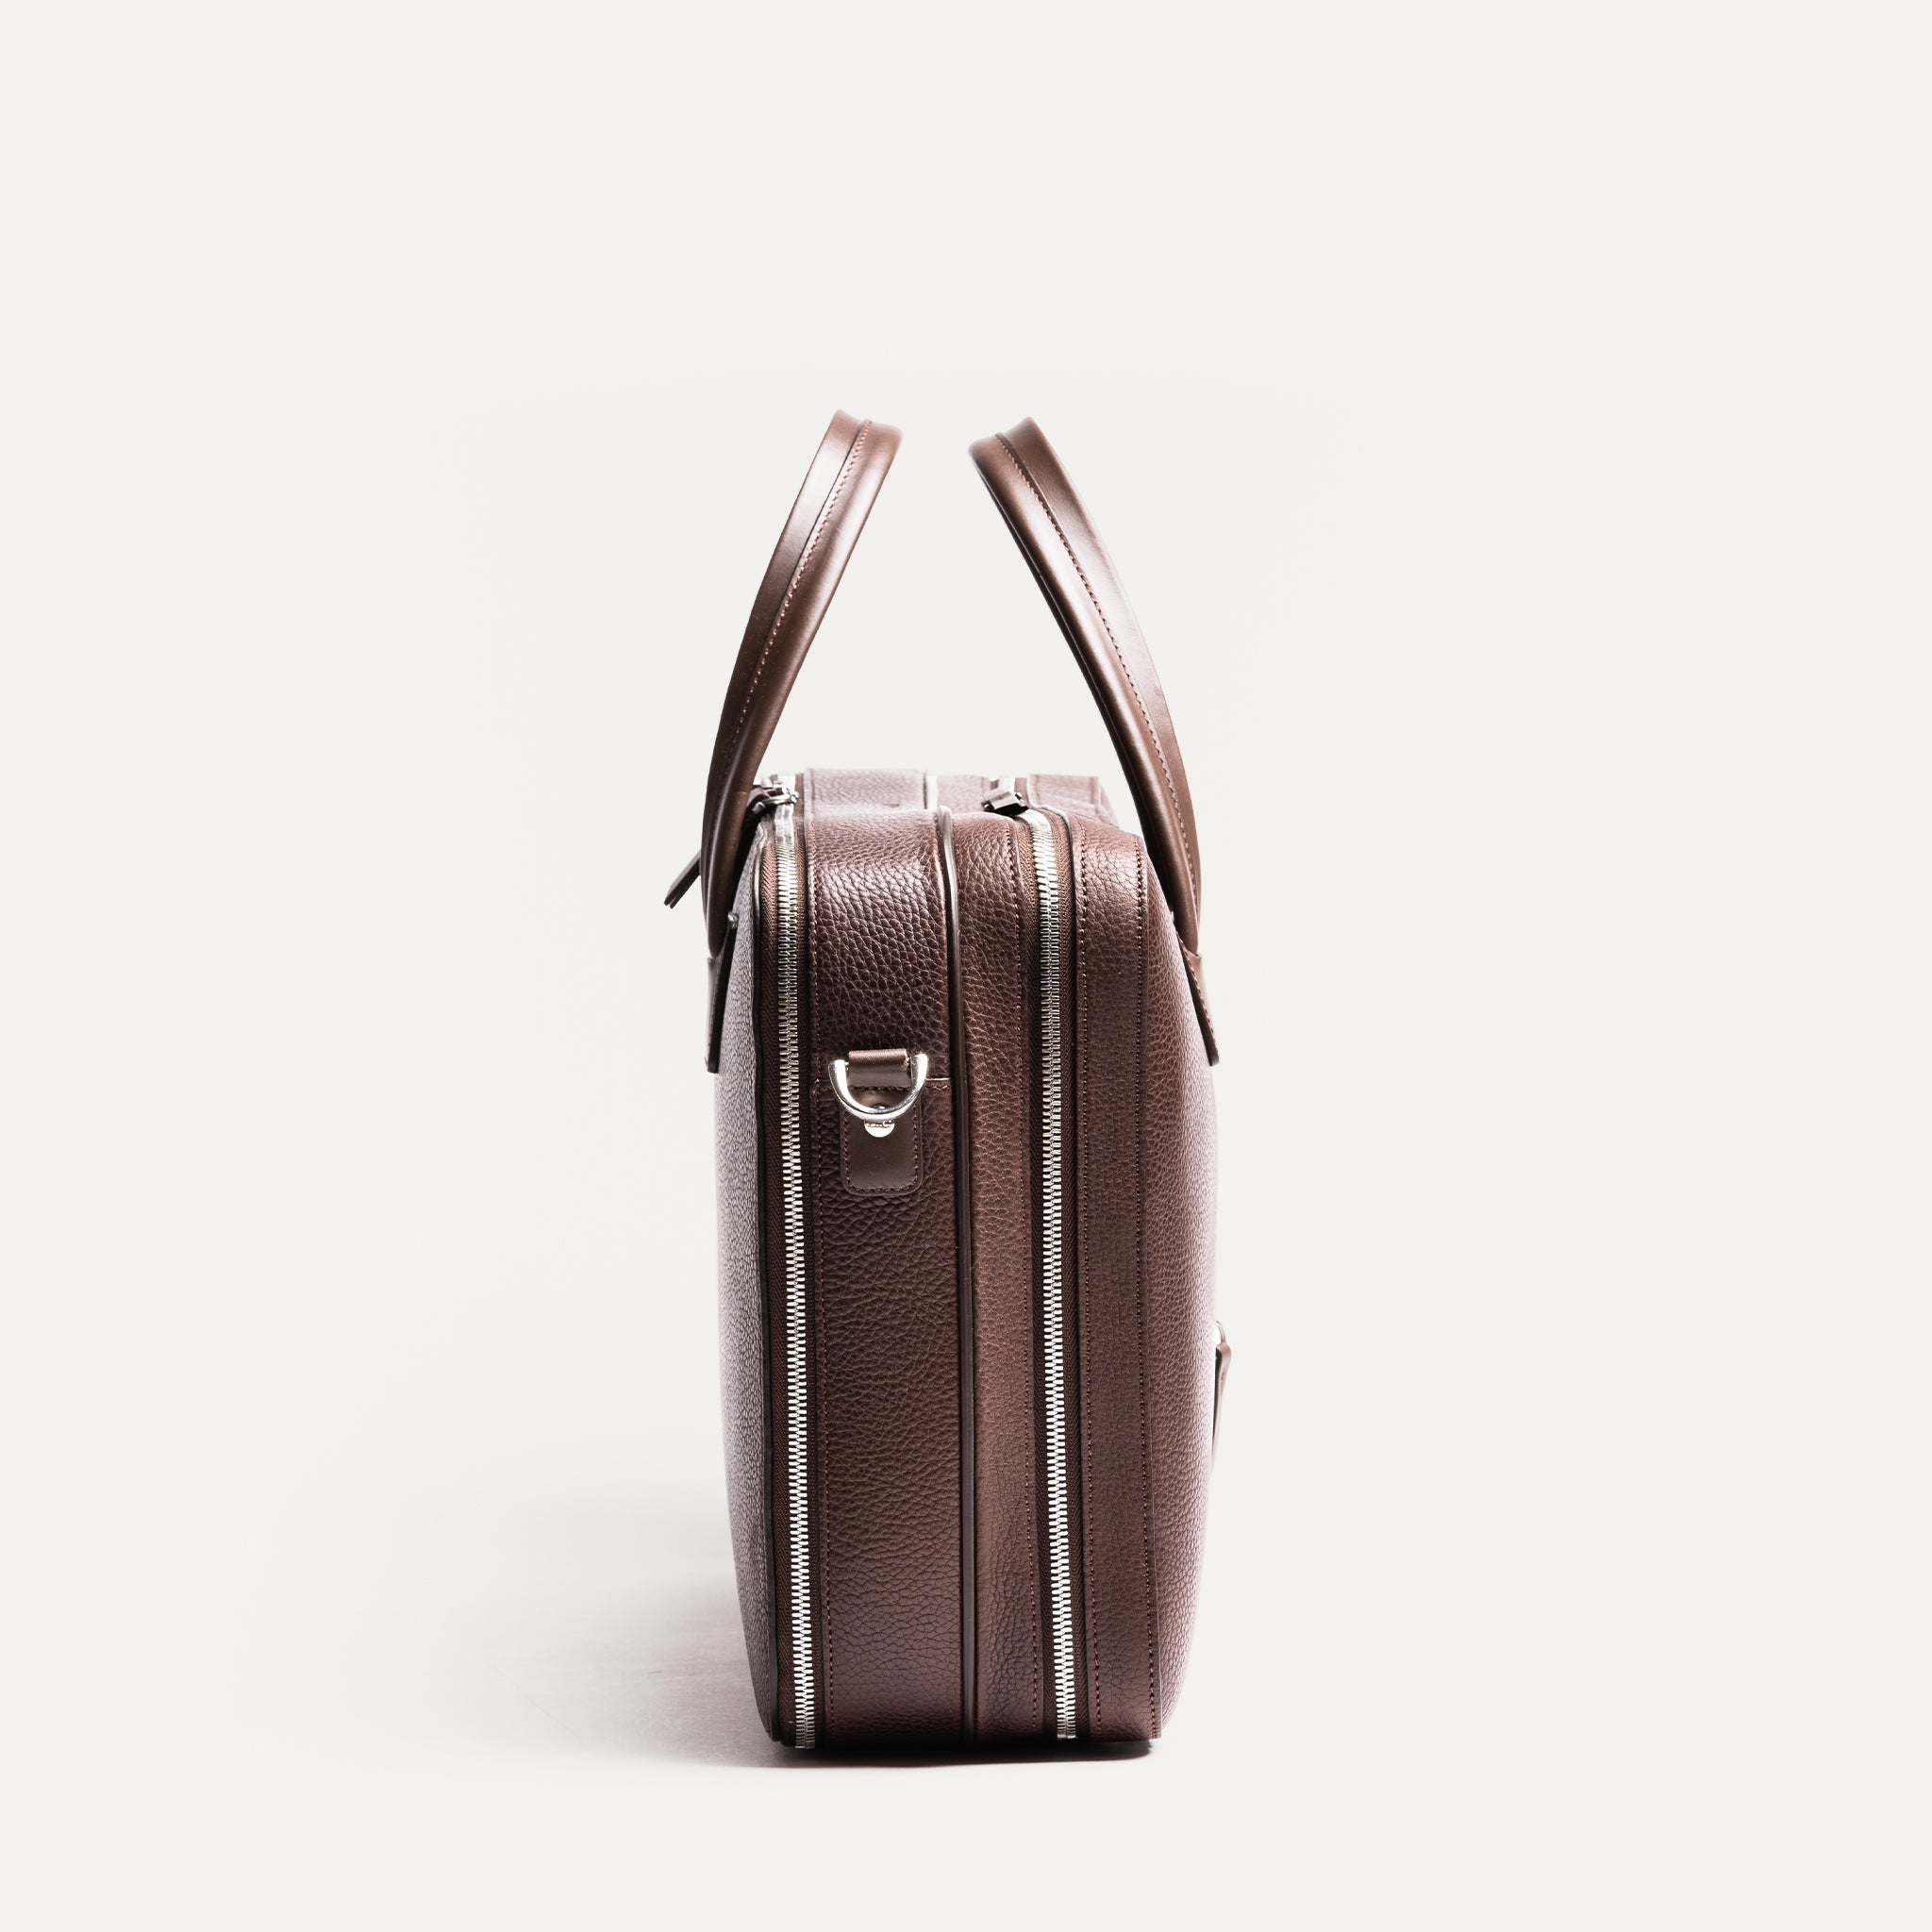 TILIO II - Chestnut | lundi 36 hour laptop bag in full grained leather